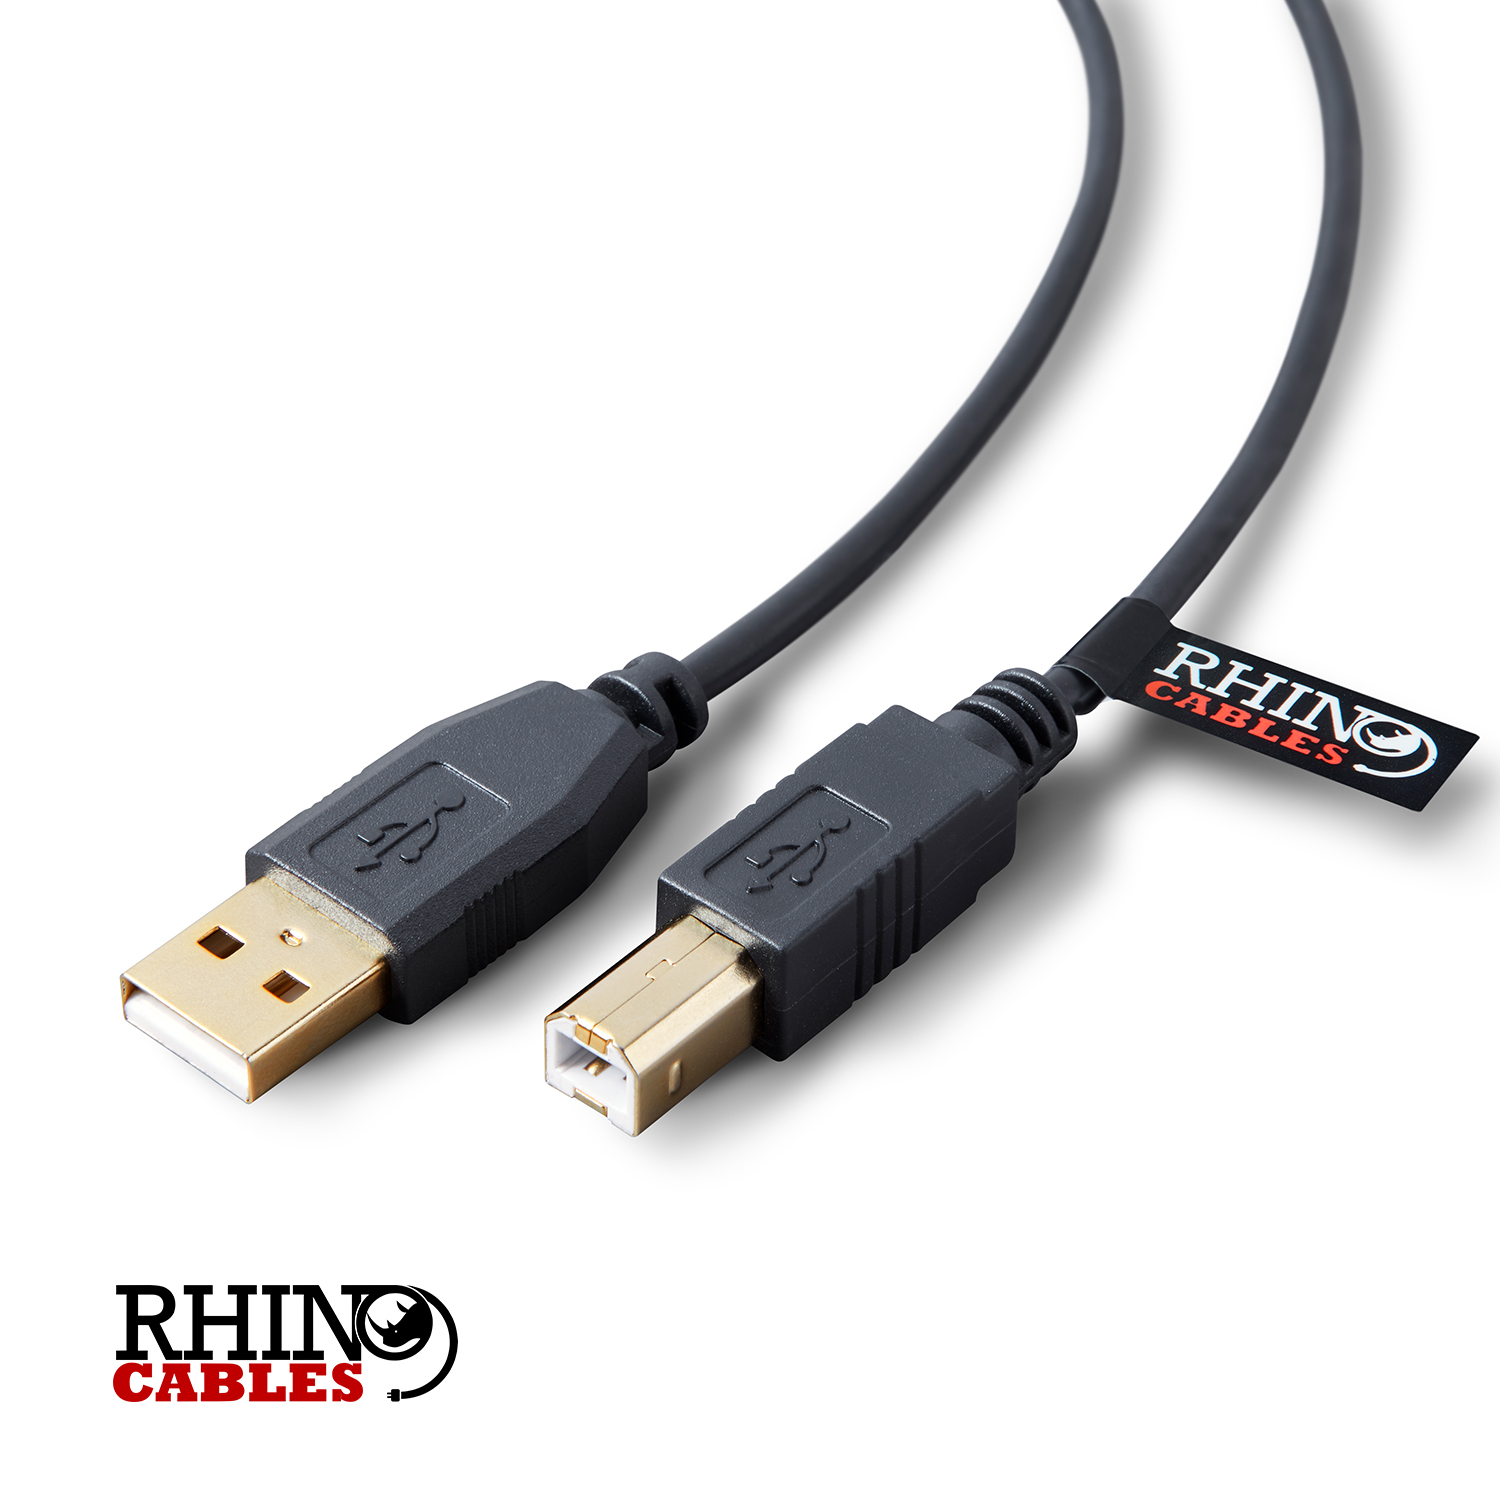 USB 2.0 HQ A to B PRINTER CABLE - rhinocables.co.uk